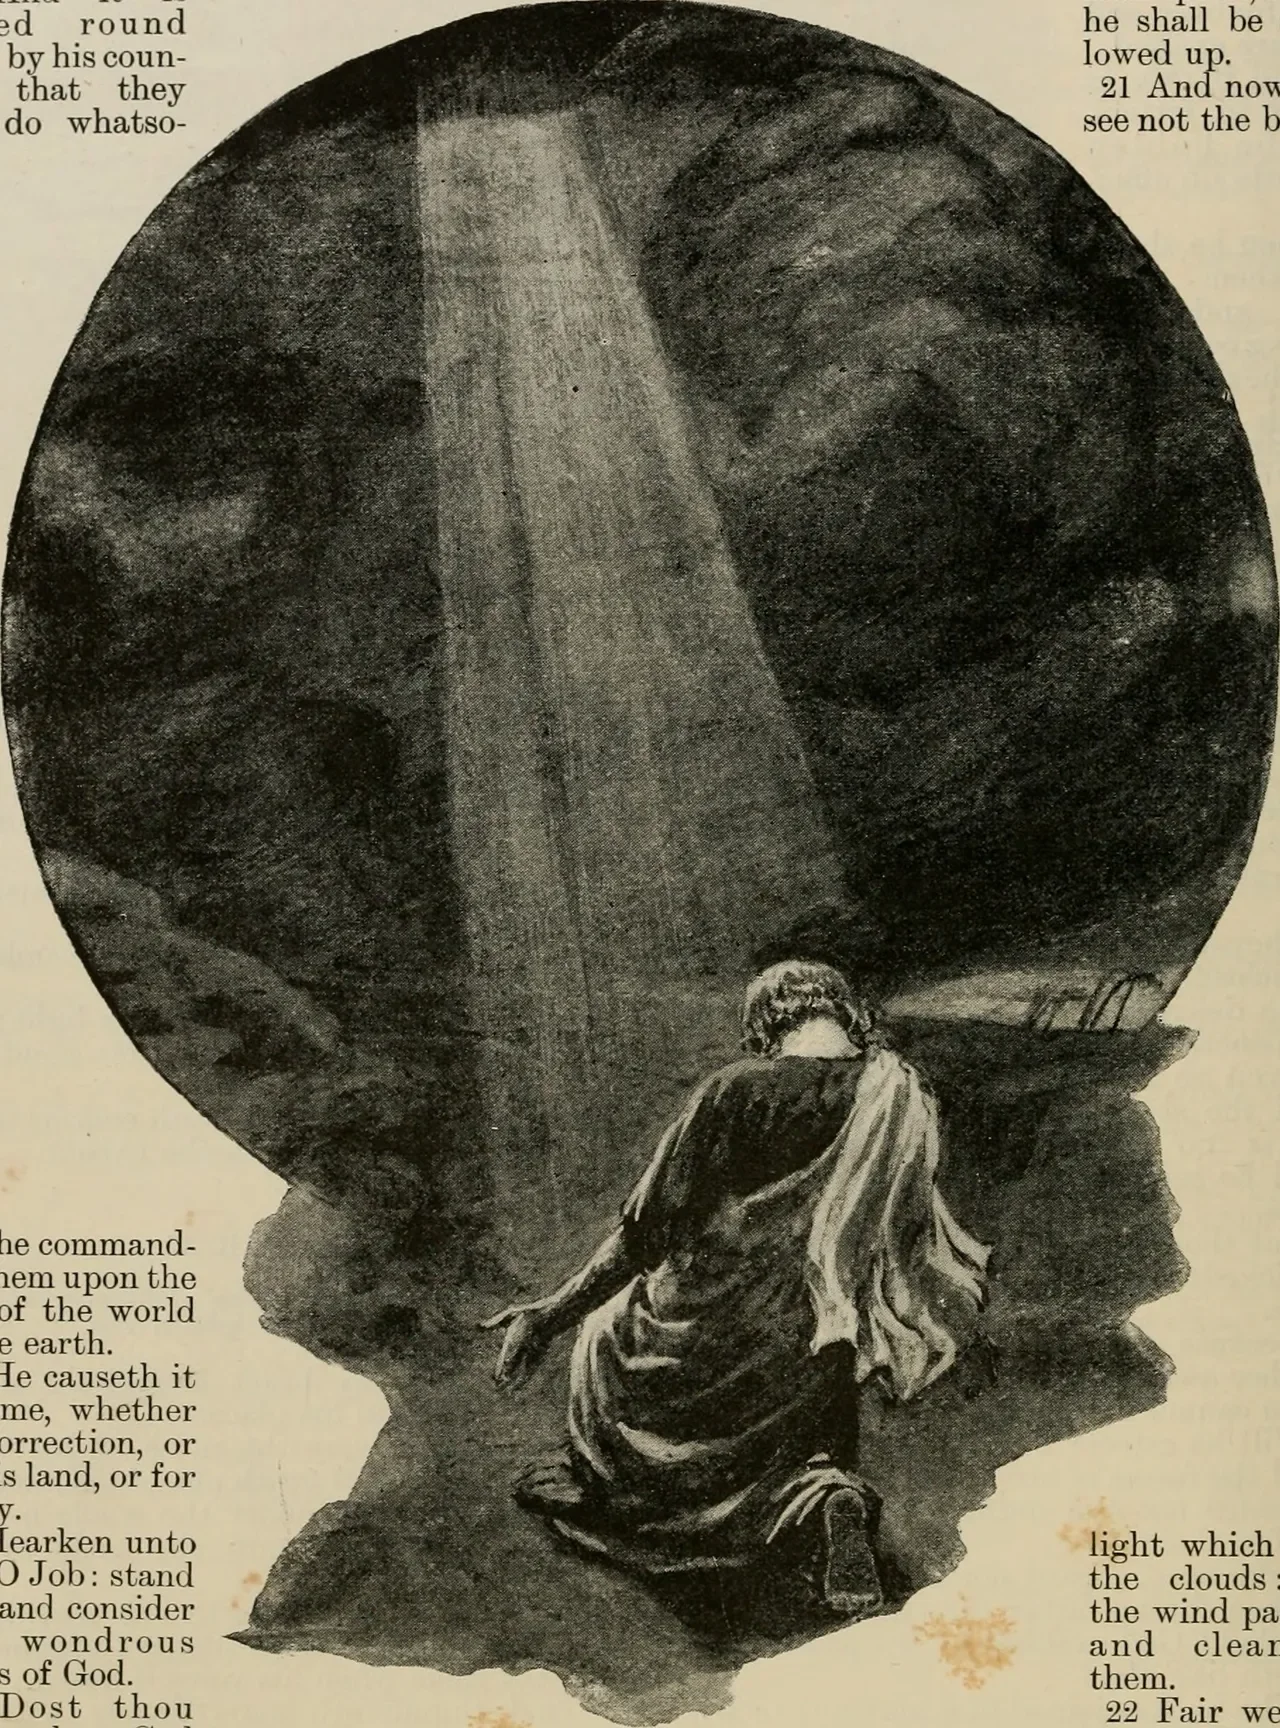 "Out of the whirlwind" (Image Source: WikiMedia Commons)